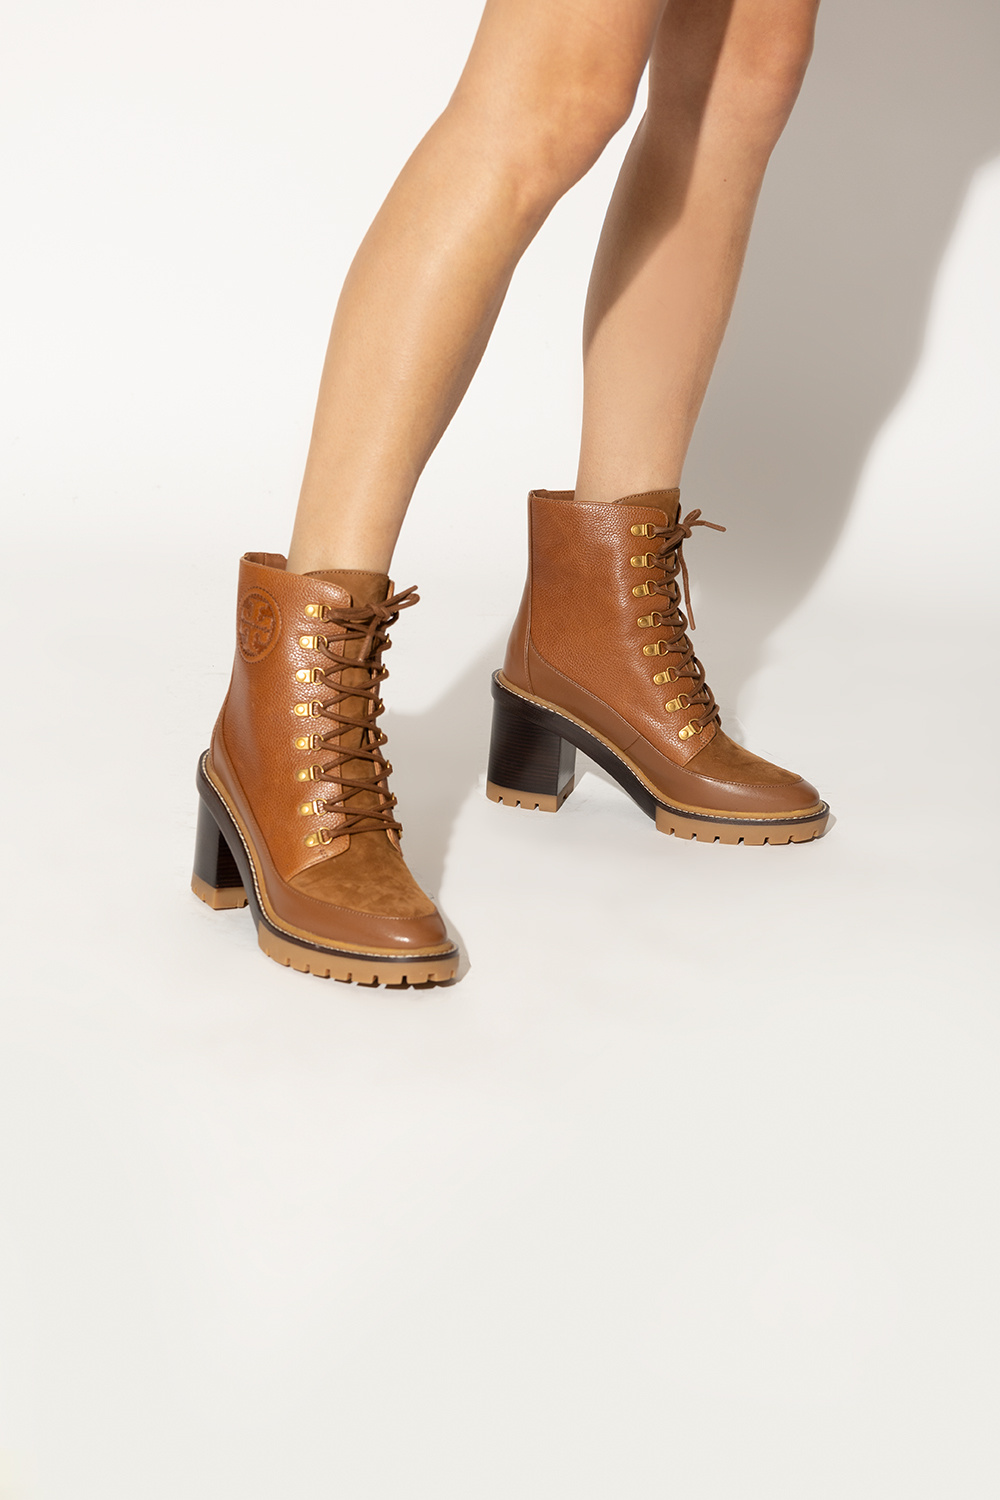 Brown 'Miller' heeled ankle boots Tory Burch - Vitkac KR